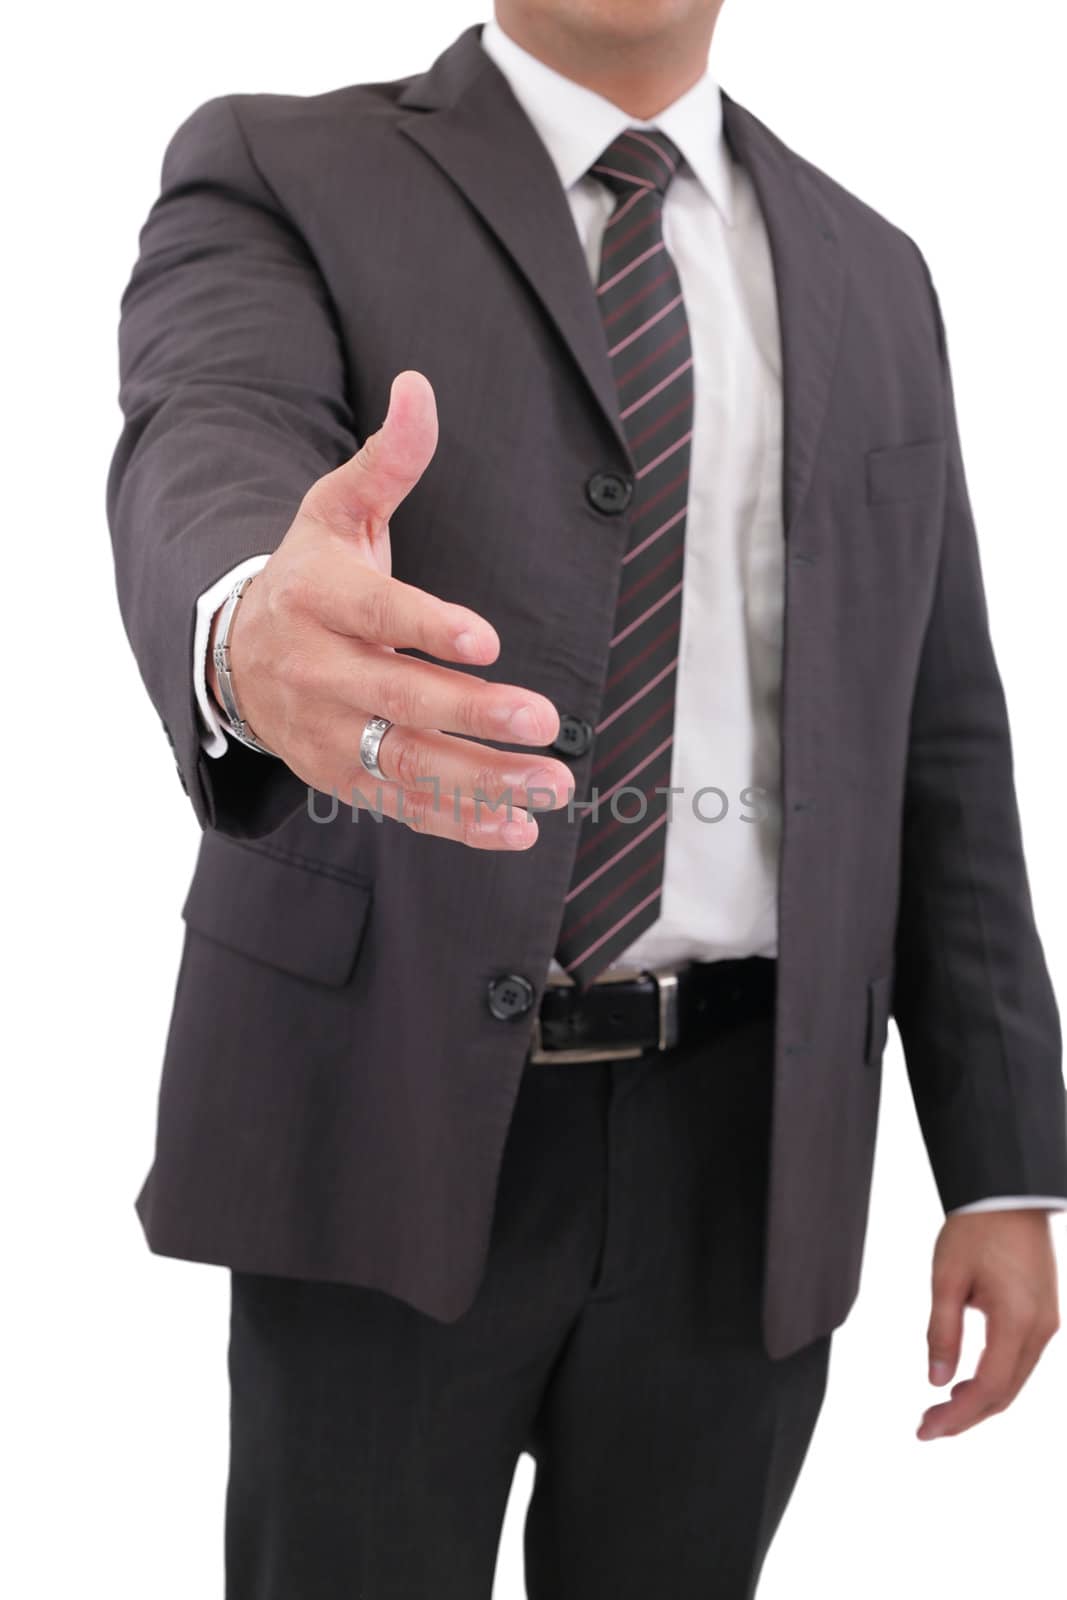 Business man with hand extended to handshake - isolated over whi by dacasdo